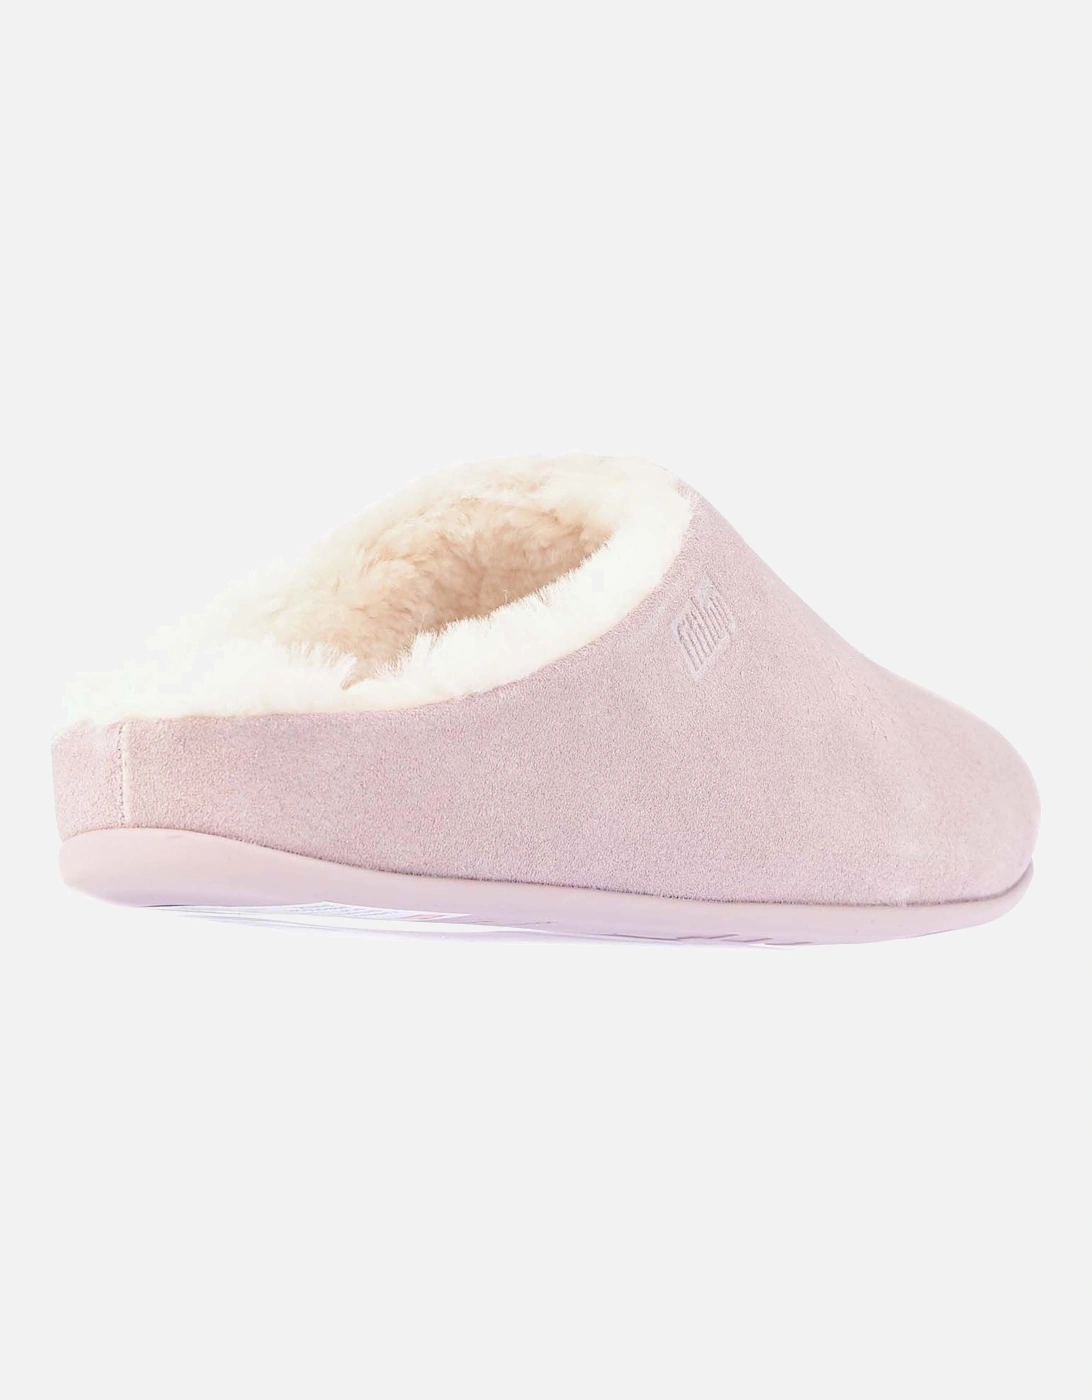 Womens Chrissie Shearling Slippers